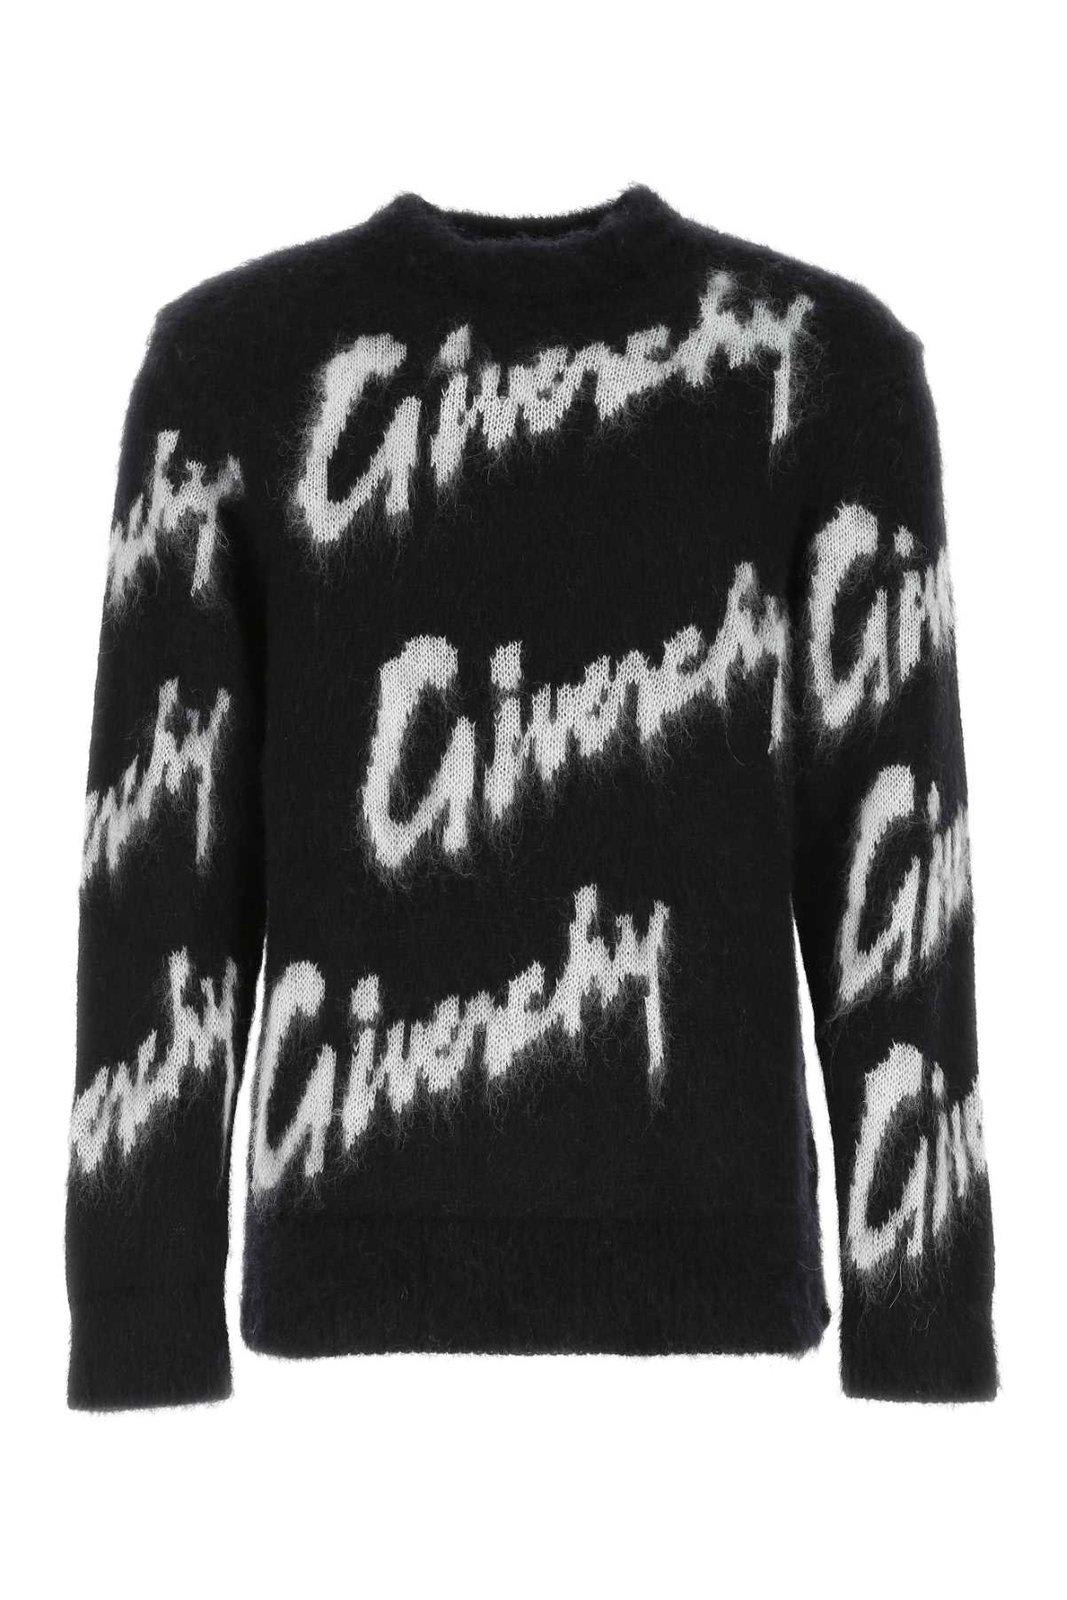 GIVENCHY ALLOVER LOGO INTARSIA KNITTED JUMPER